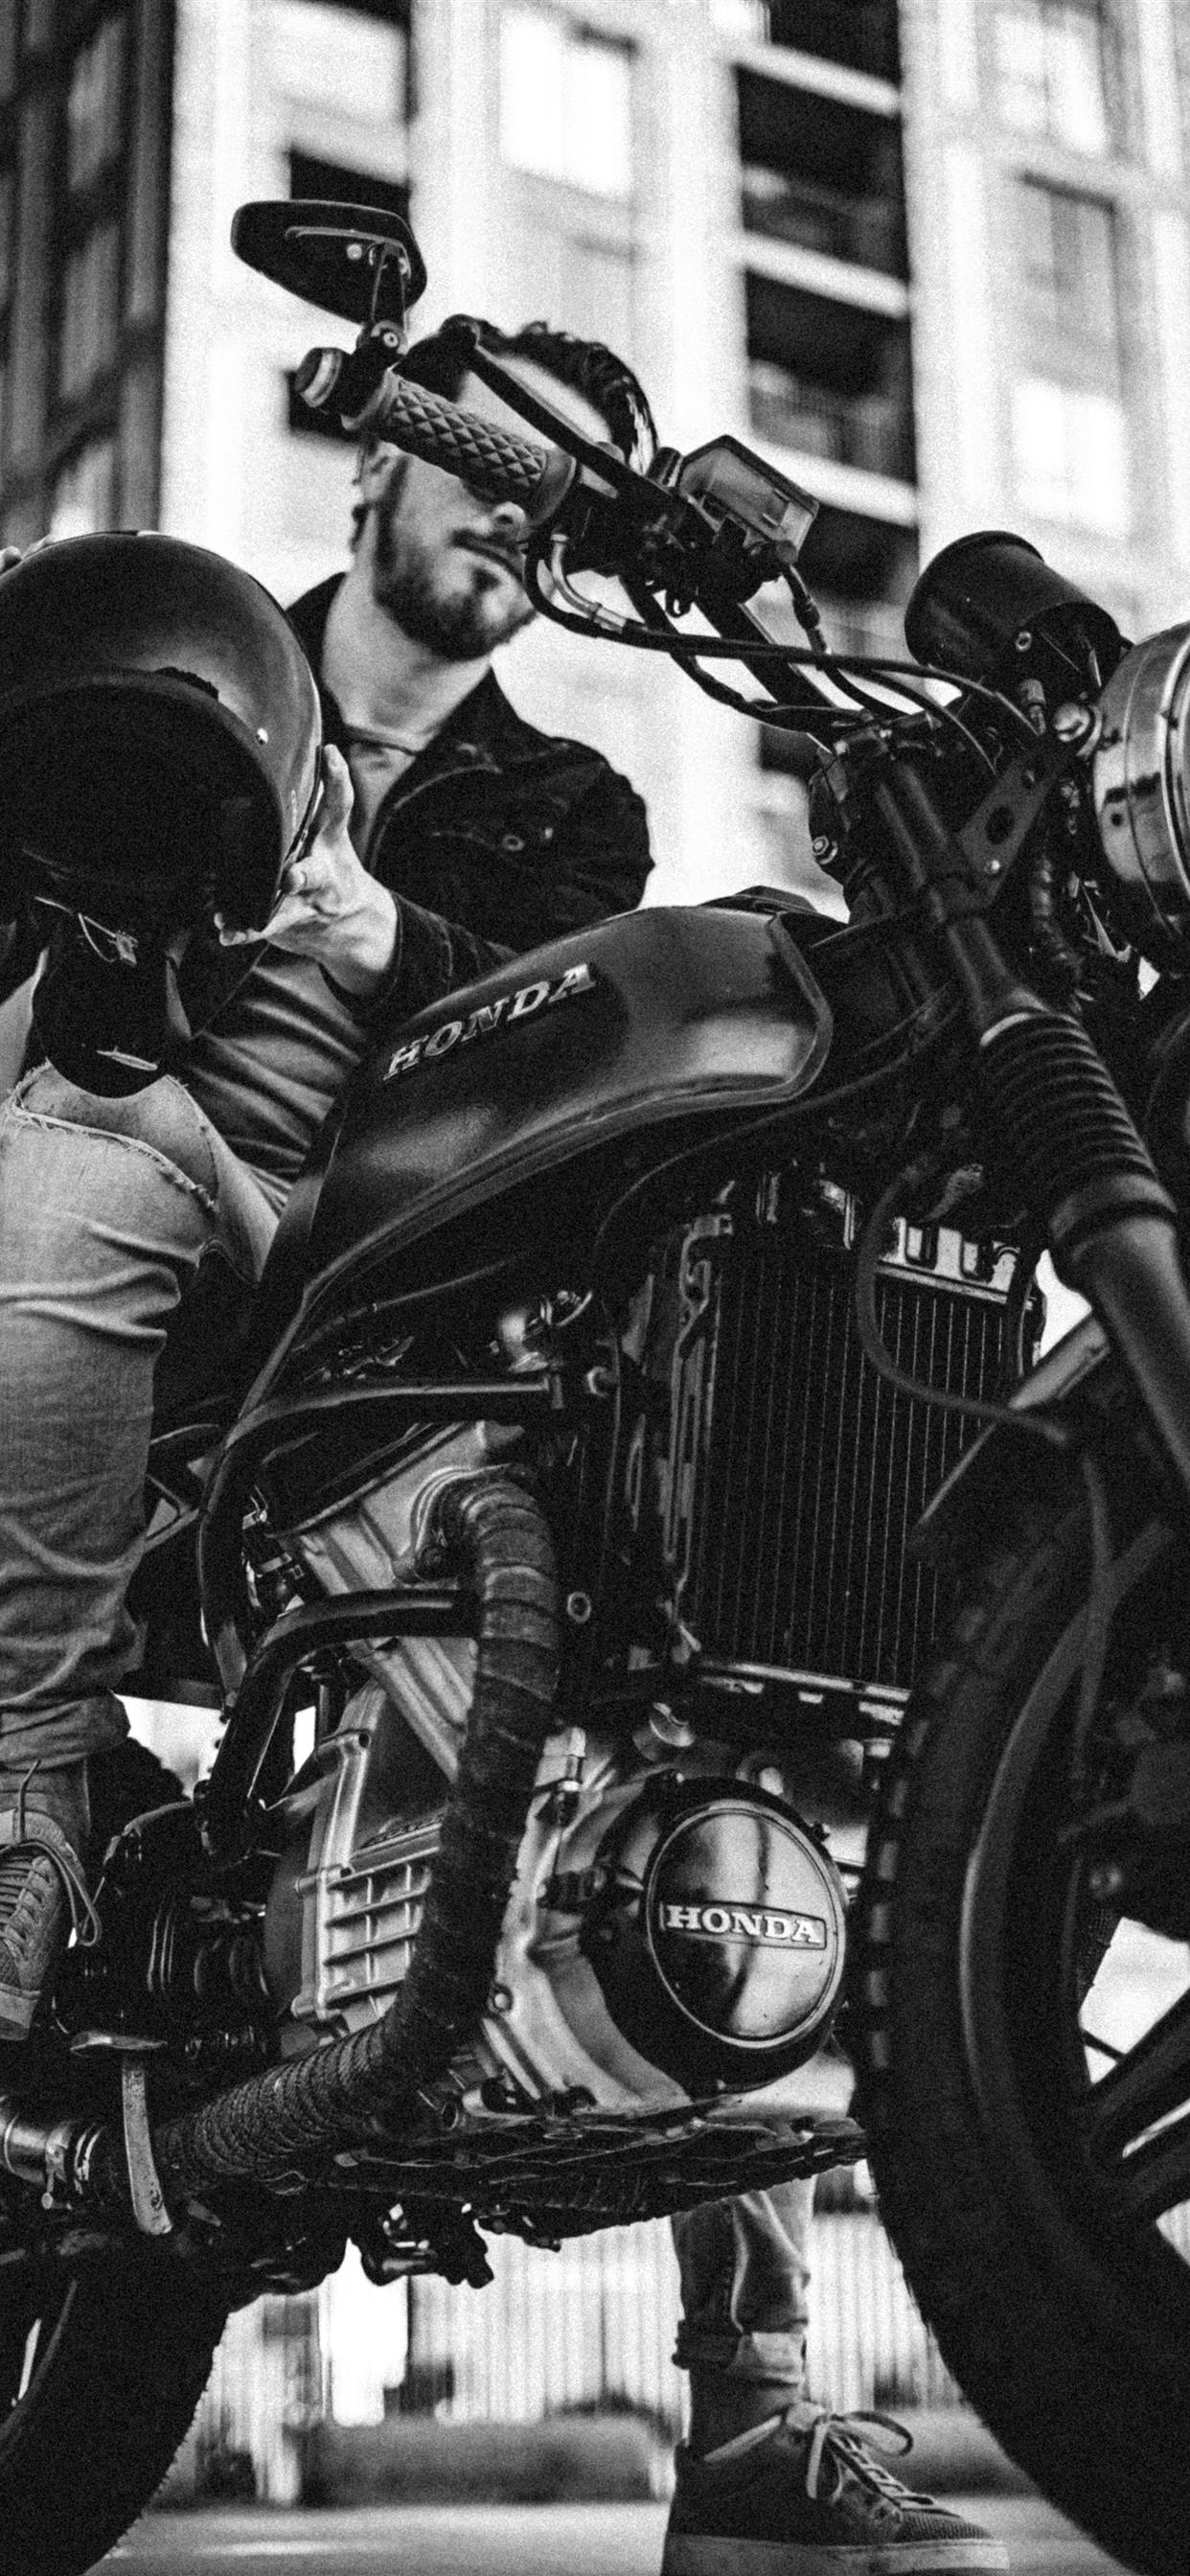 Motorcycle build iPhone X Wallpaper Free Download